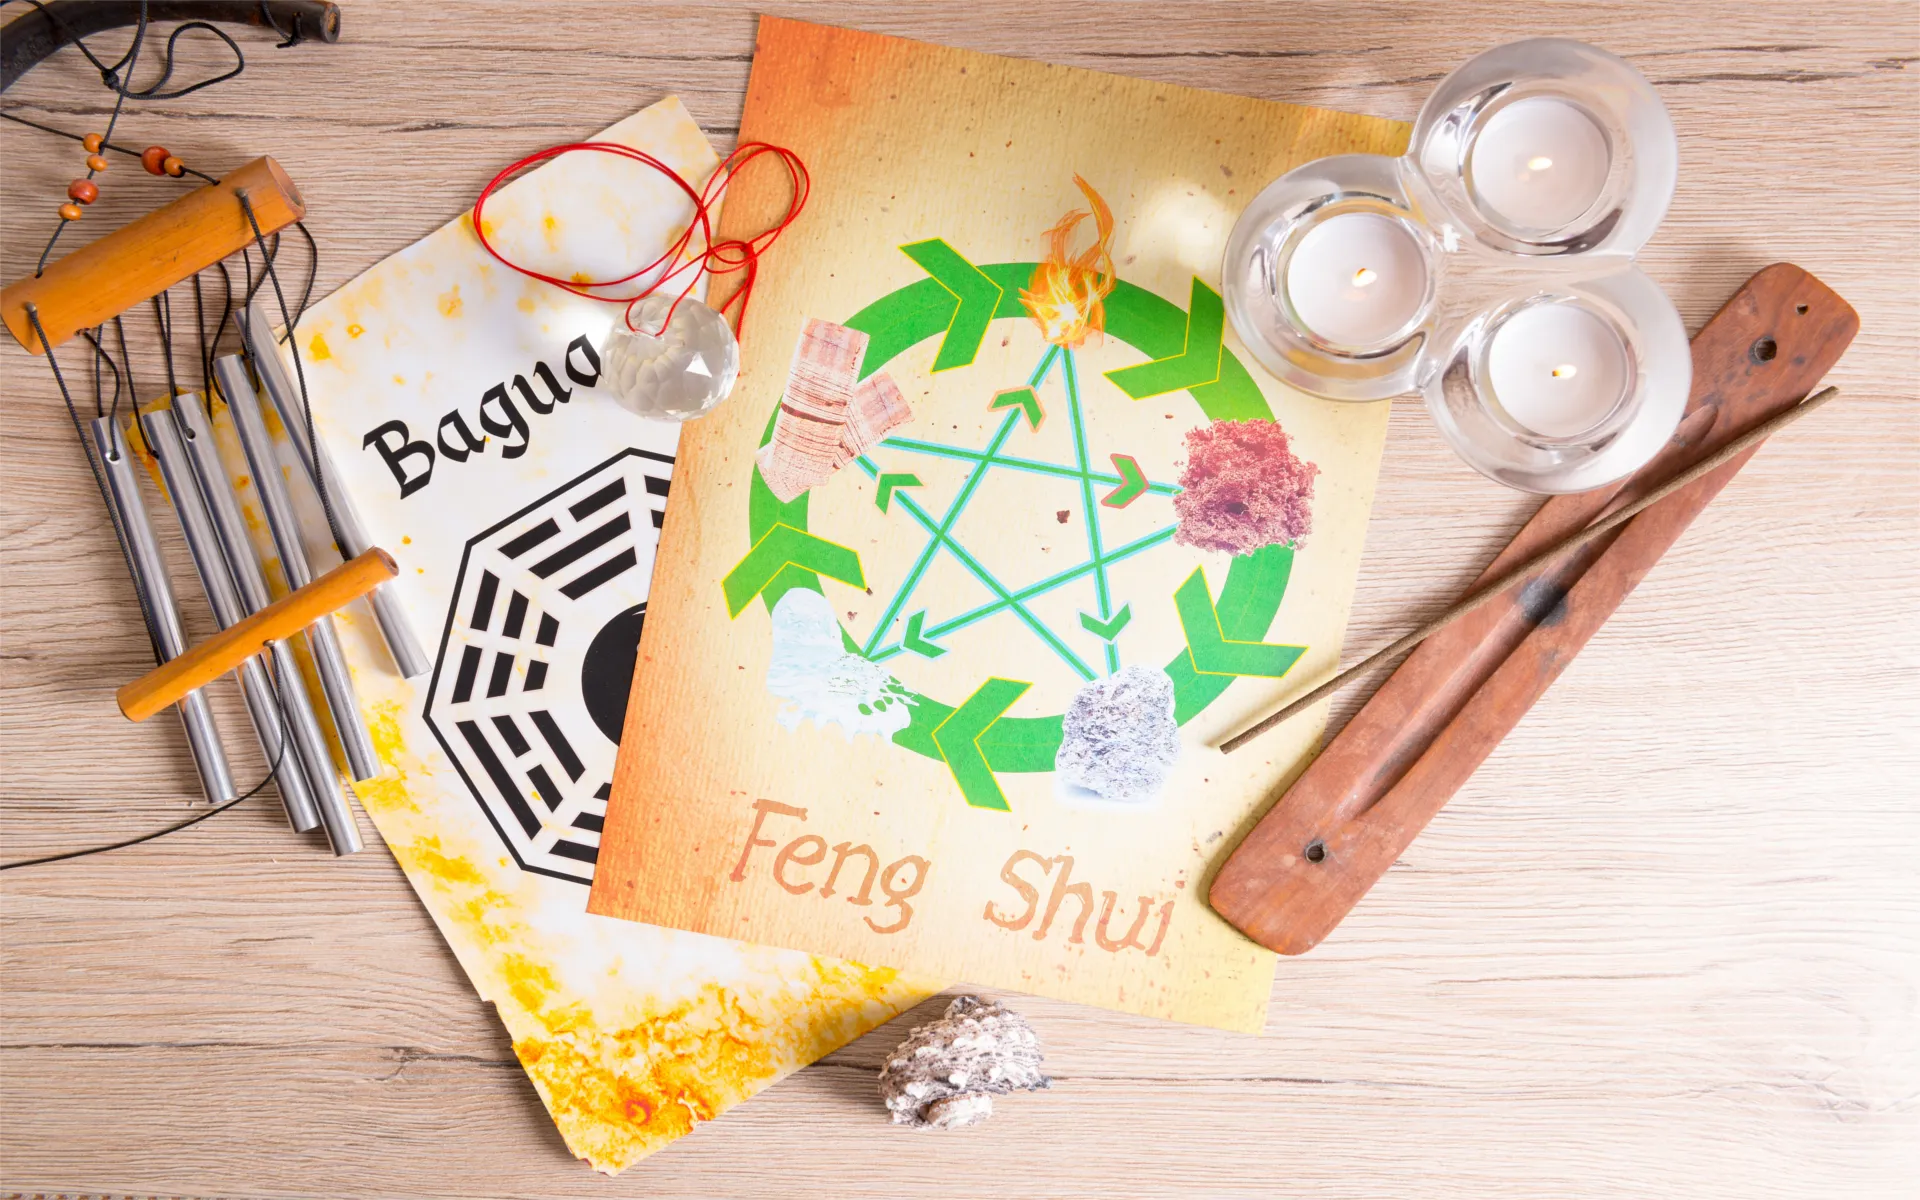 The Beginner’s Guide to Feng Shui